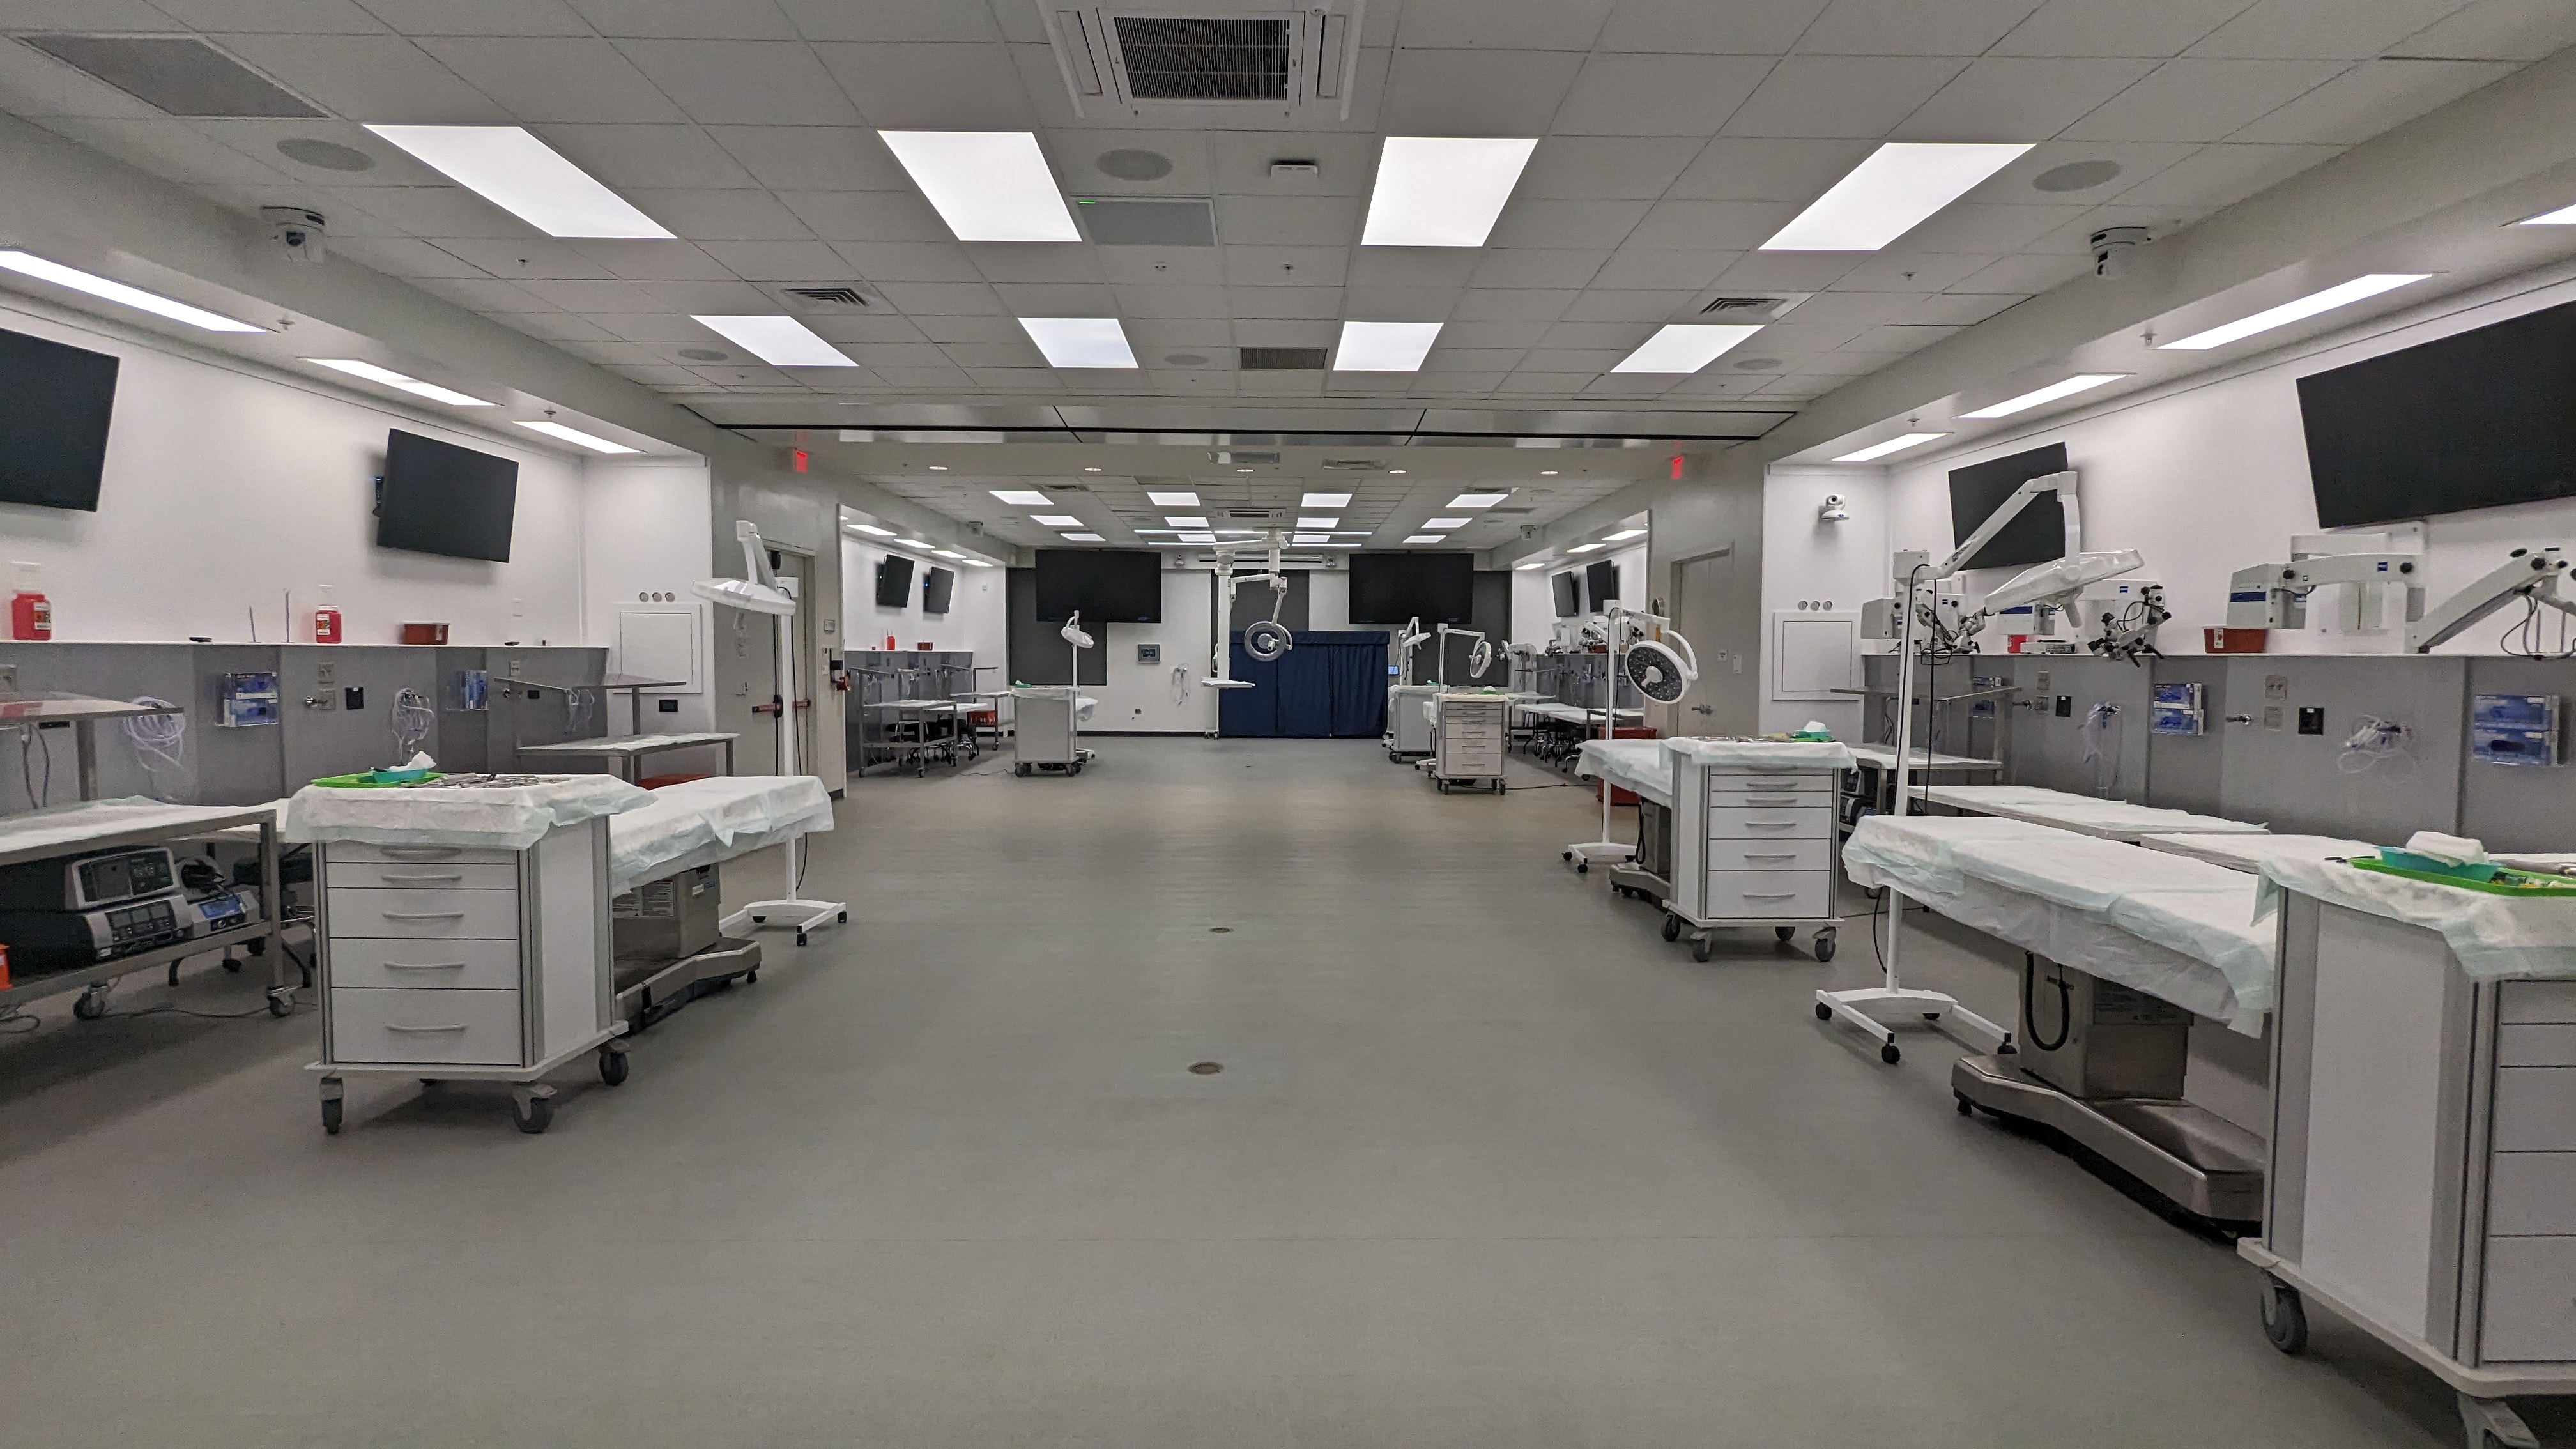 Labs 1 & 2 of the Johnson & Johnson Institute facility location in Palm Beach Gardens. FL